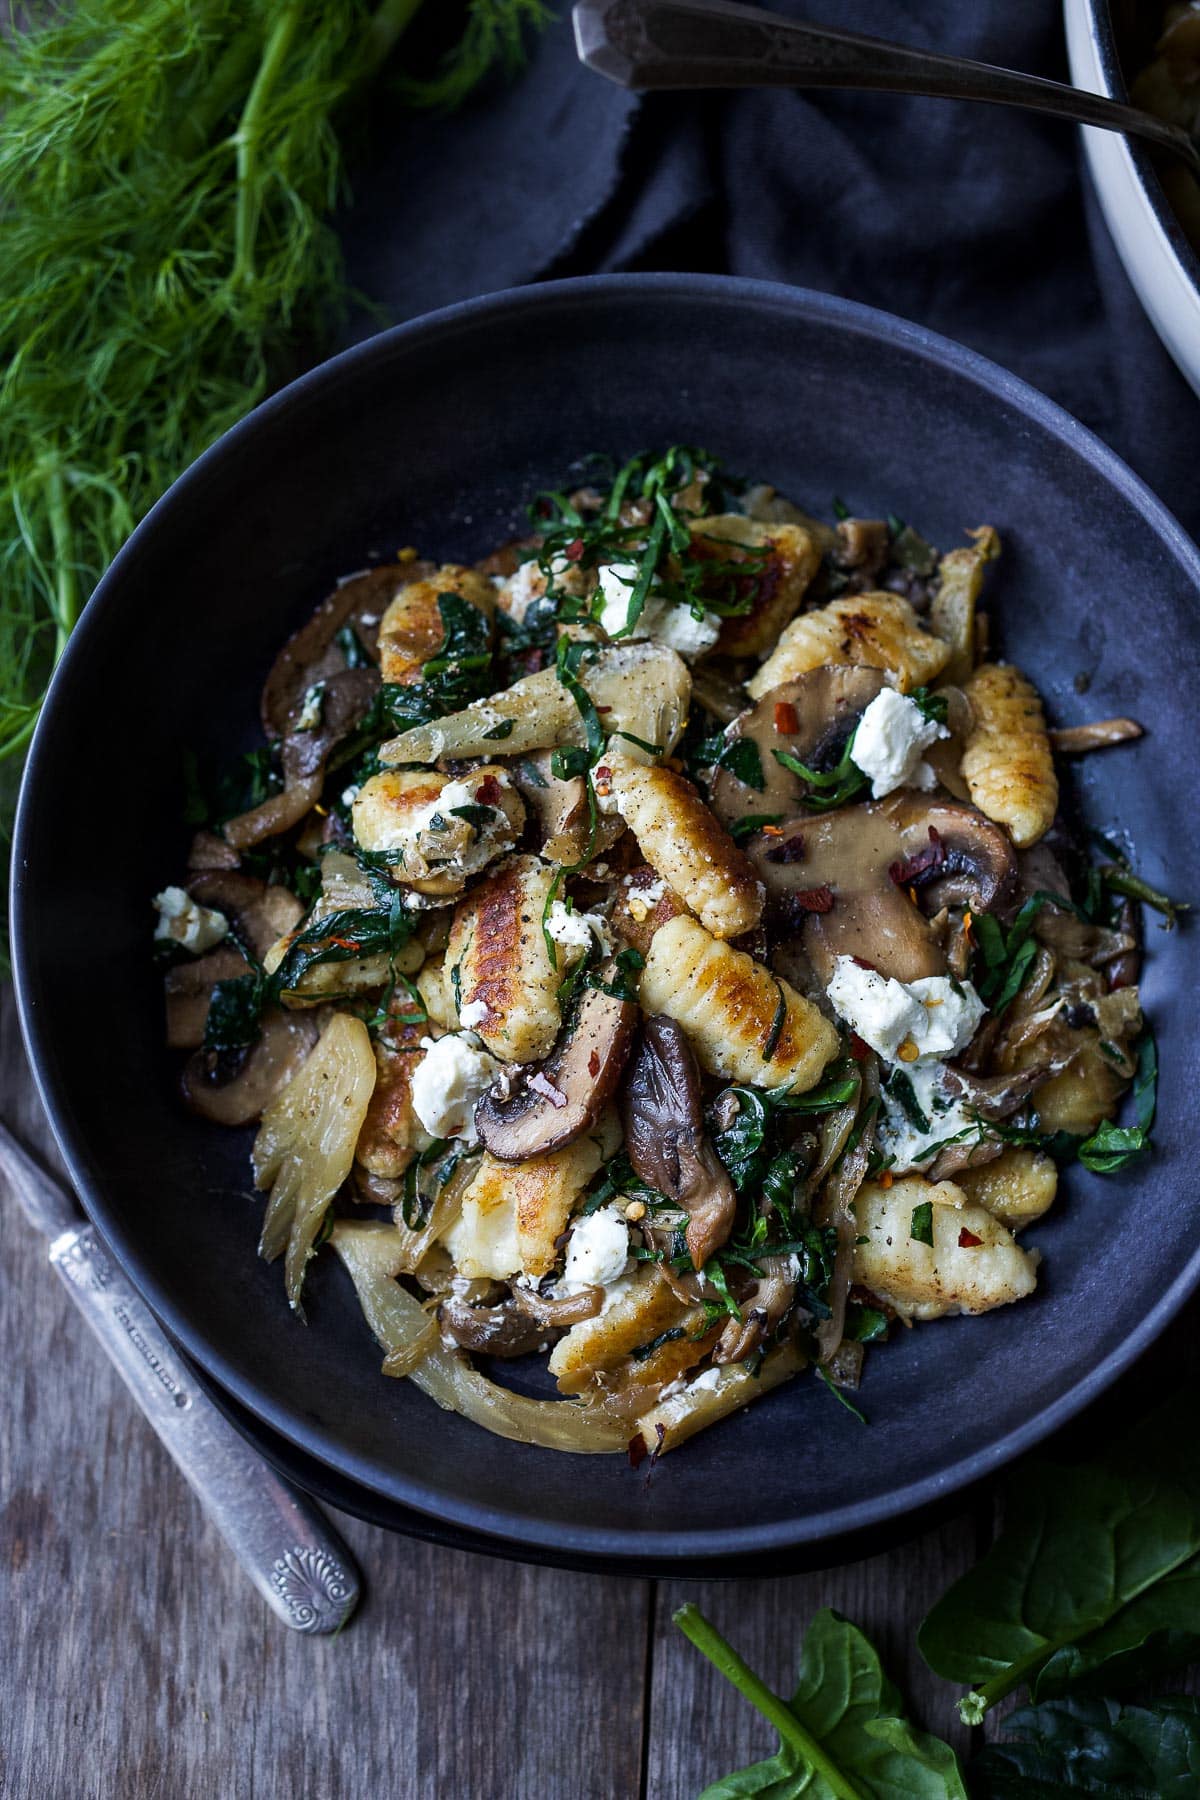 Caramelized fennel, sautéed mushrooms and wilted spinach combine perfectly with pan-seared potato gnocchi and topped with creamy goat cheese. Savory rich flavors, yet simple to put together!